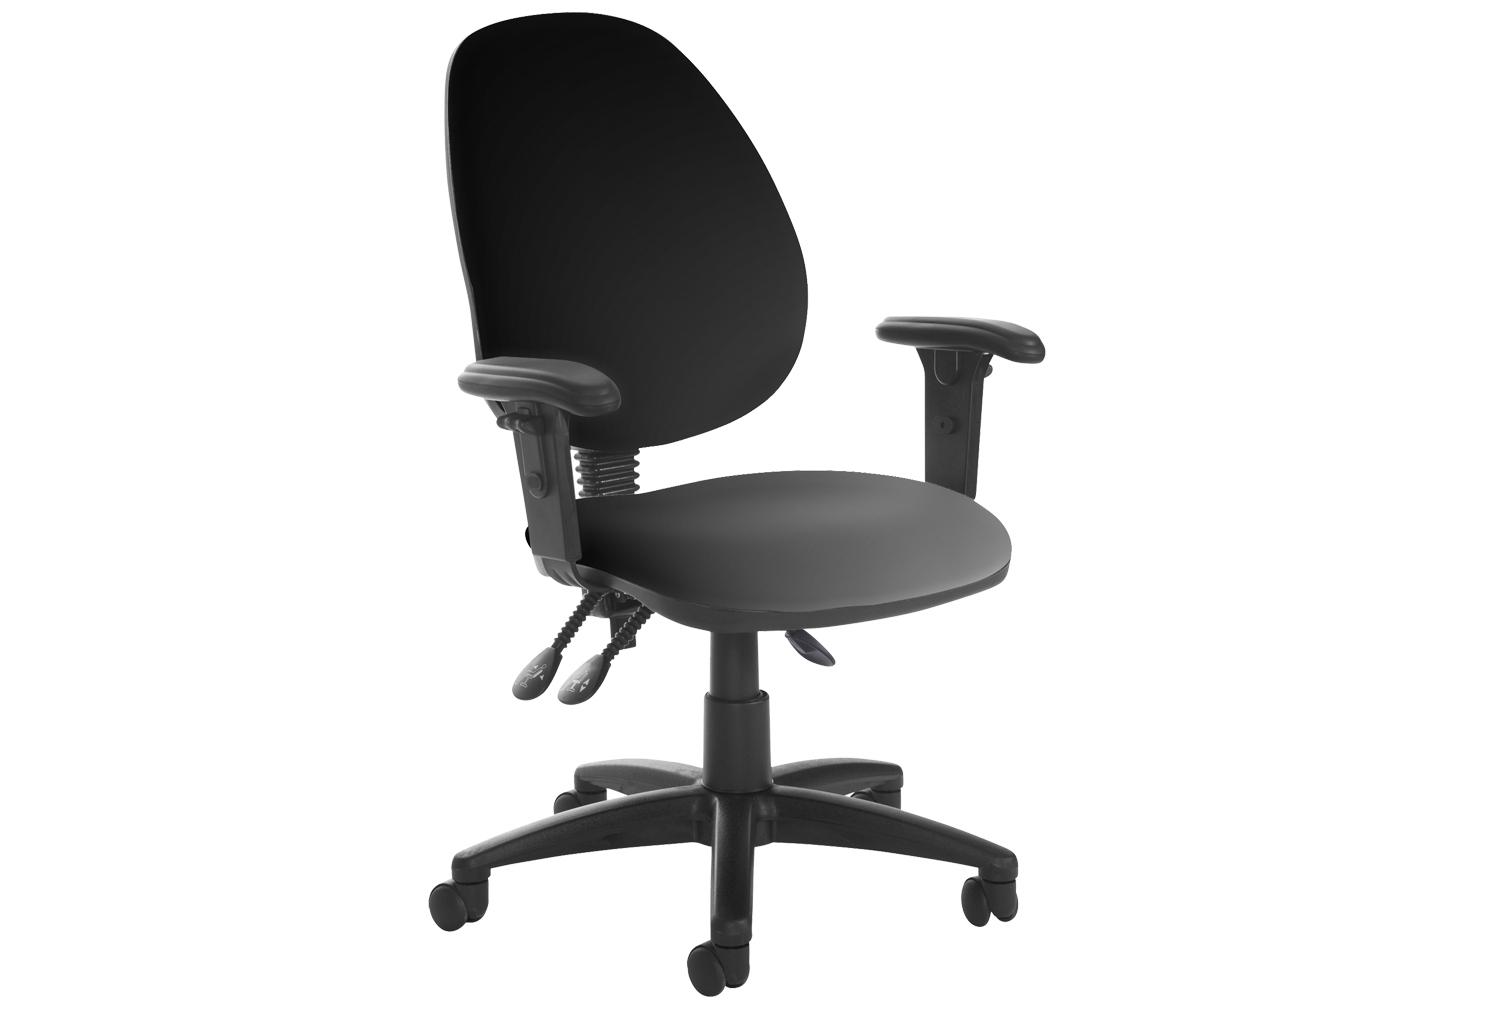 Vantage Plus High Back Asynchro Vinyl Operator Office Chair With Adjustable Arms, Black